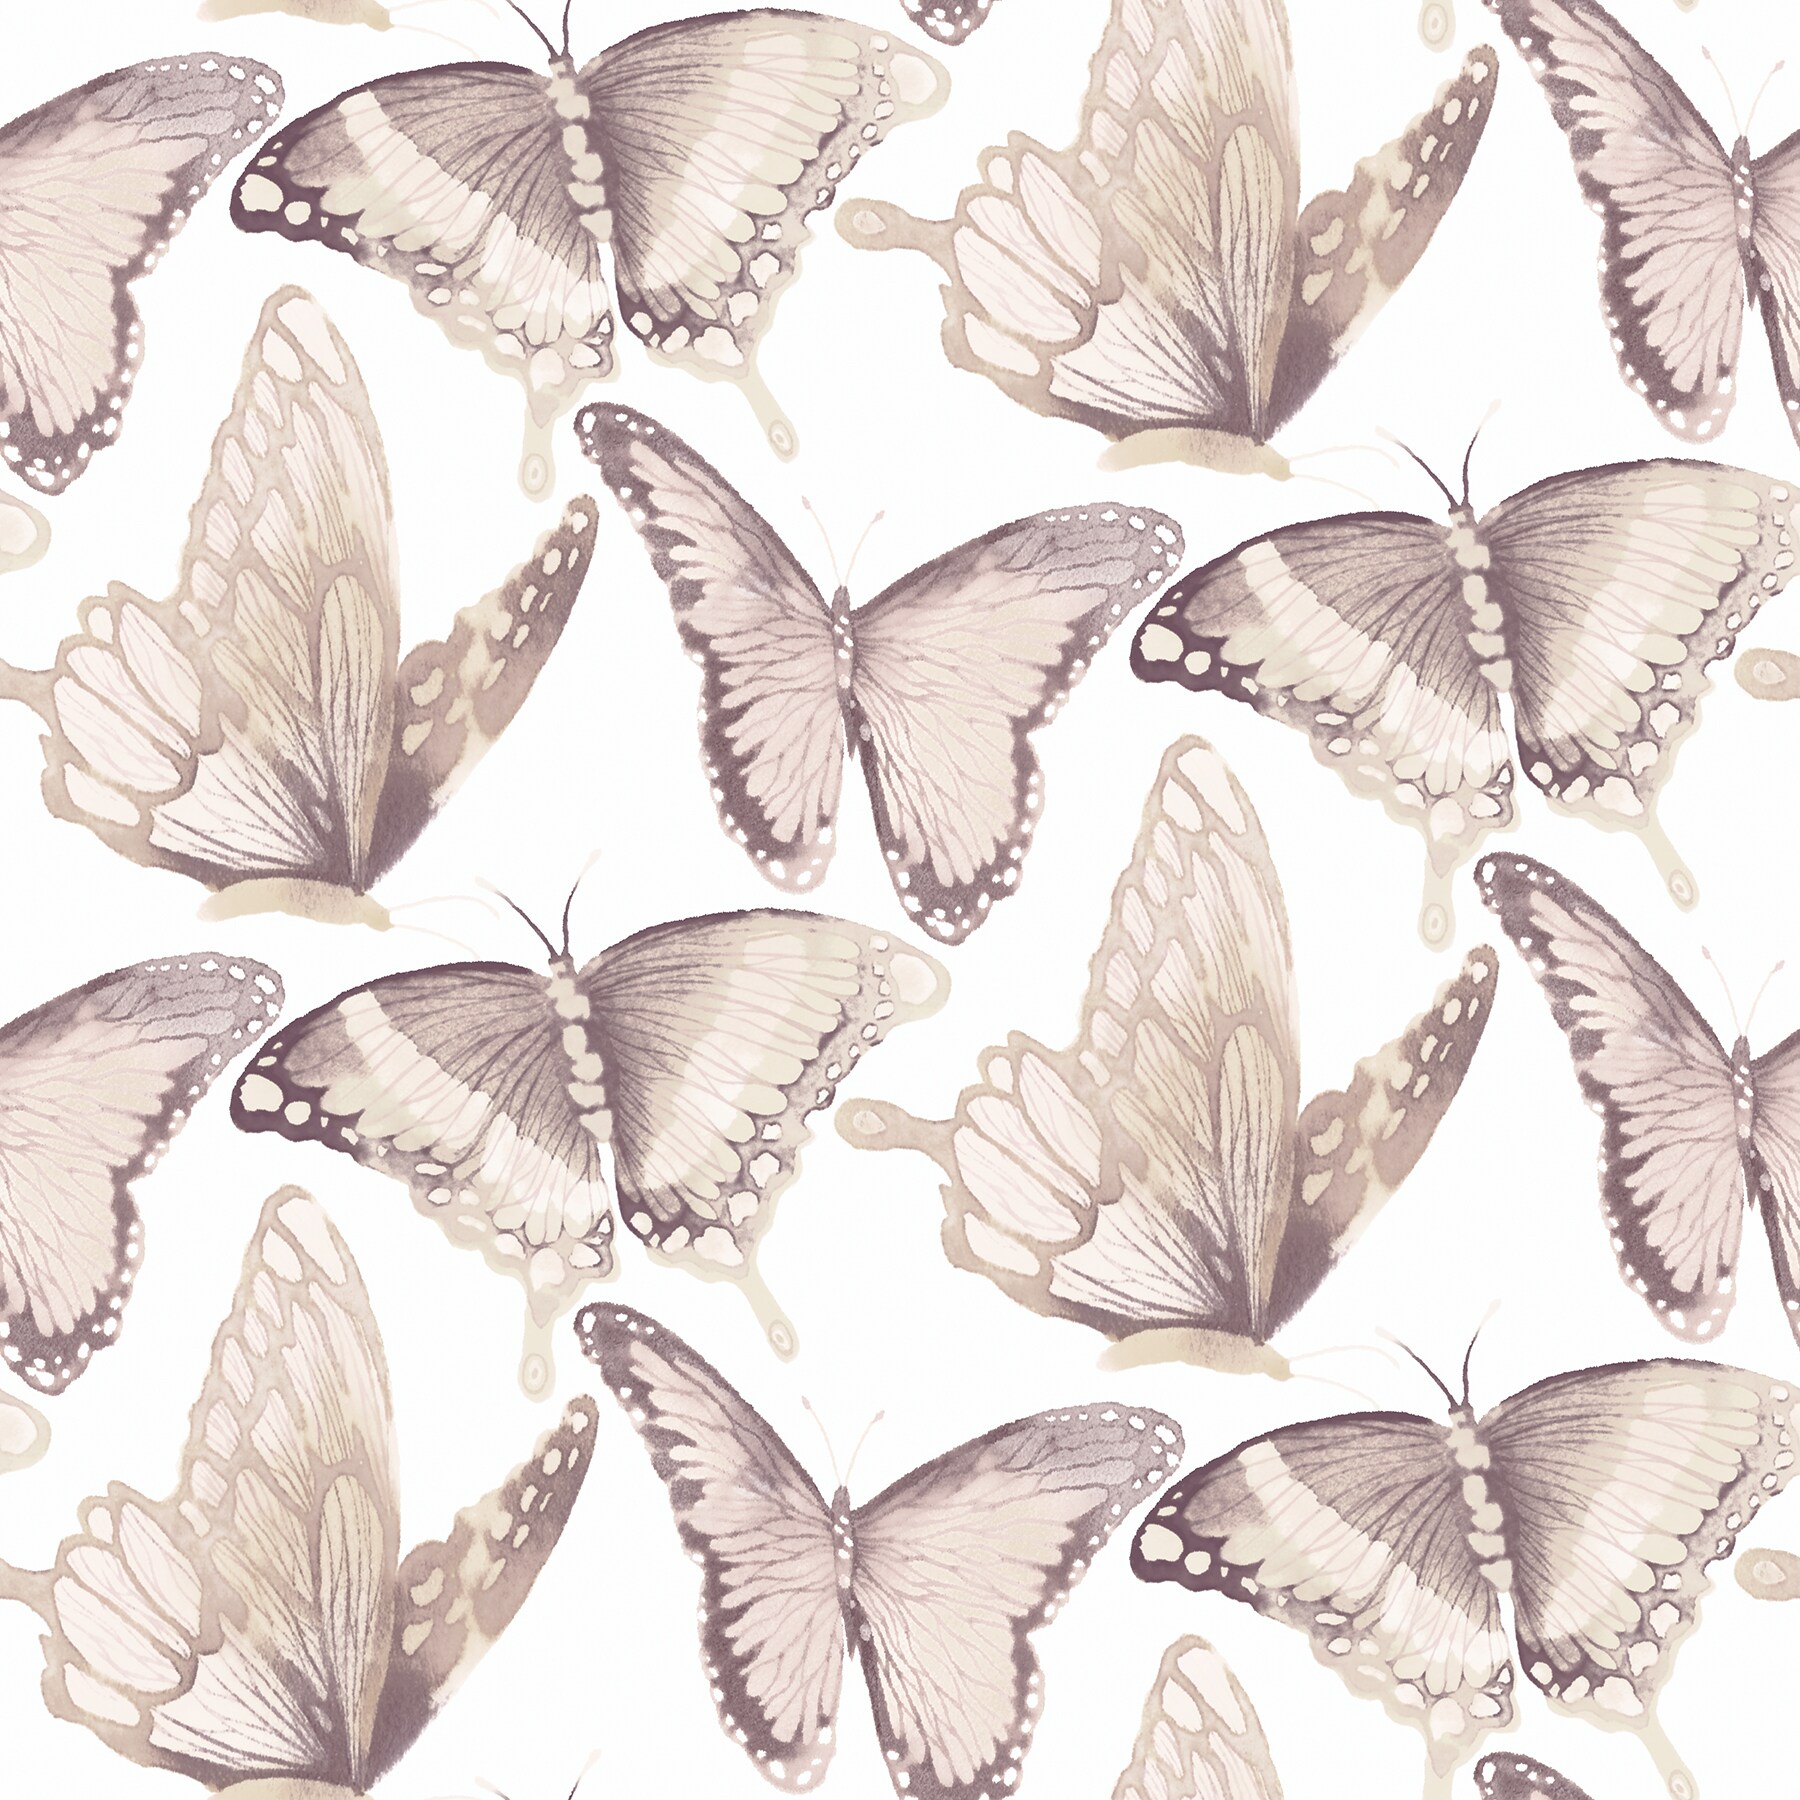 pink and white butterfly wallpaper